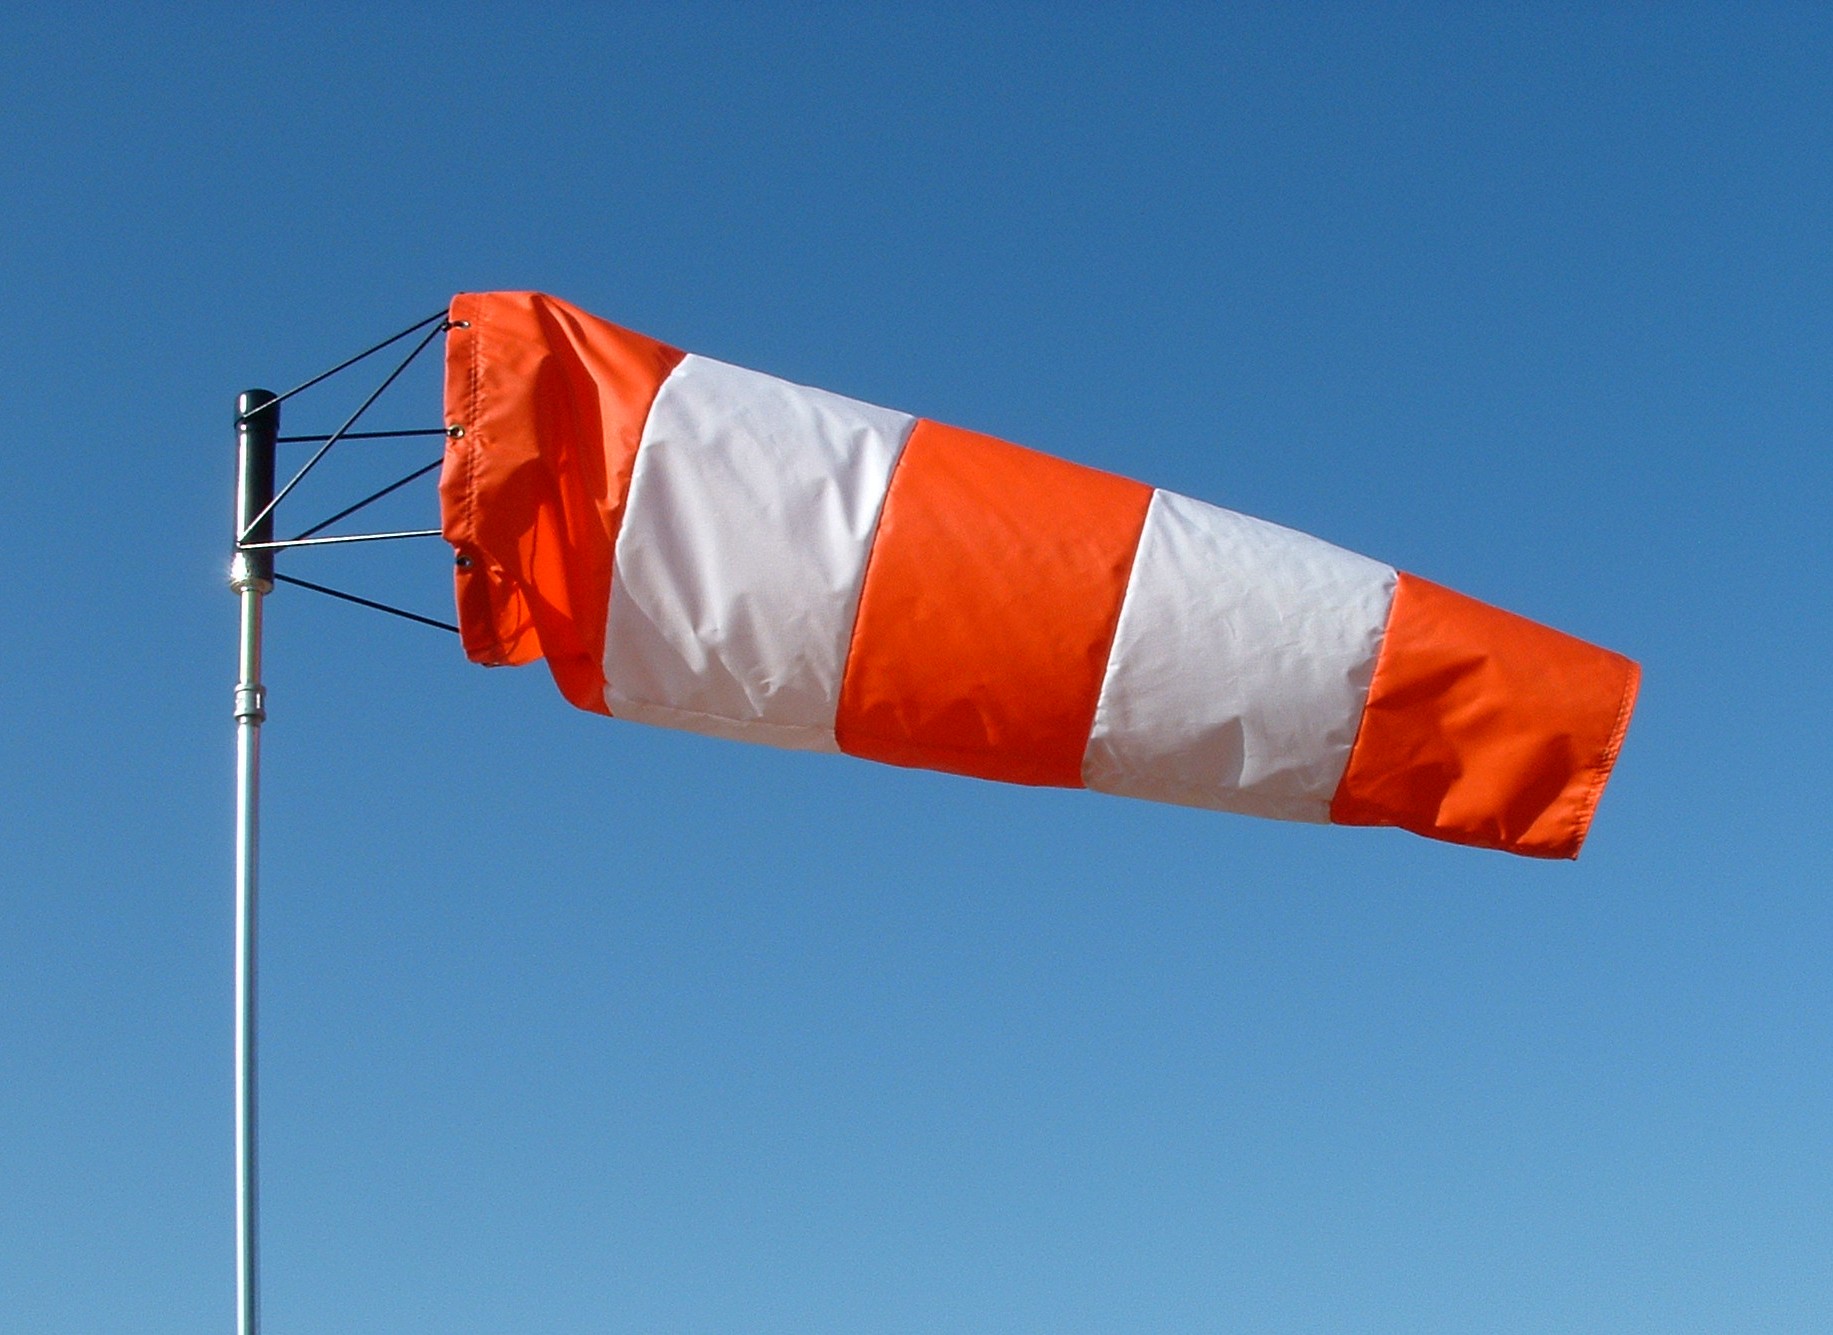 How does a windsock work?